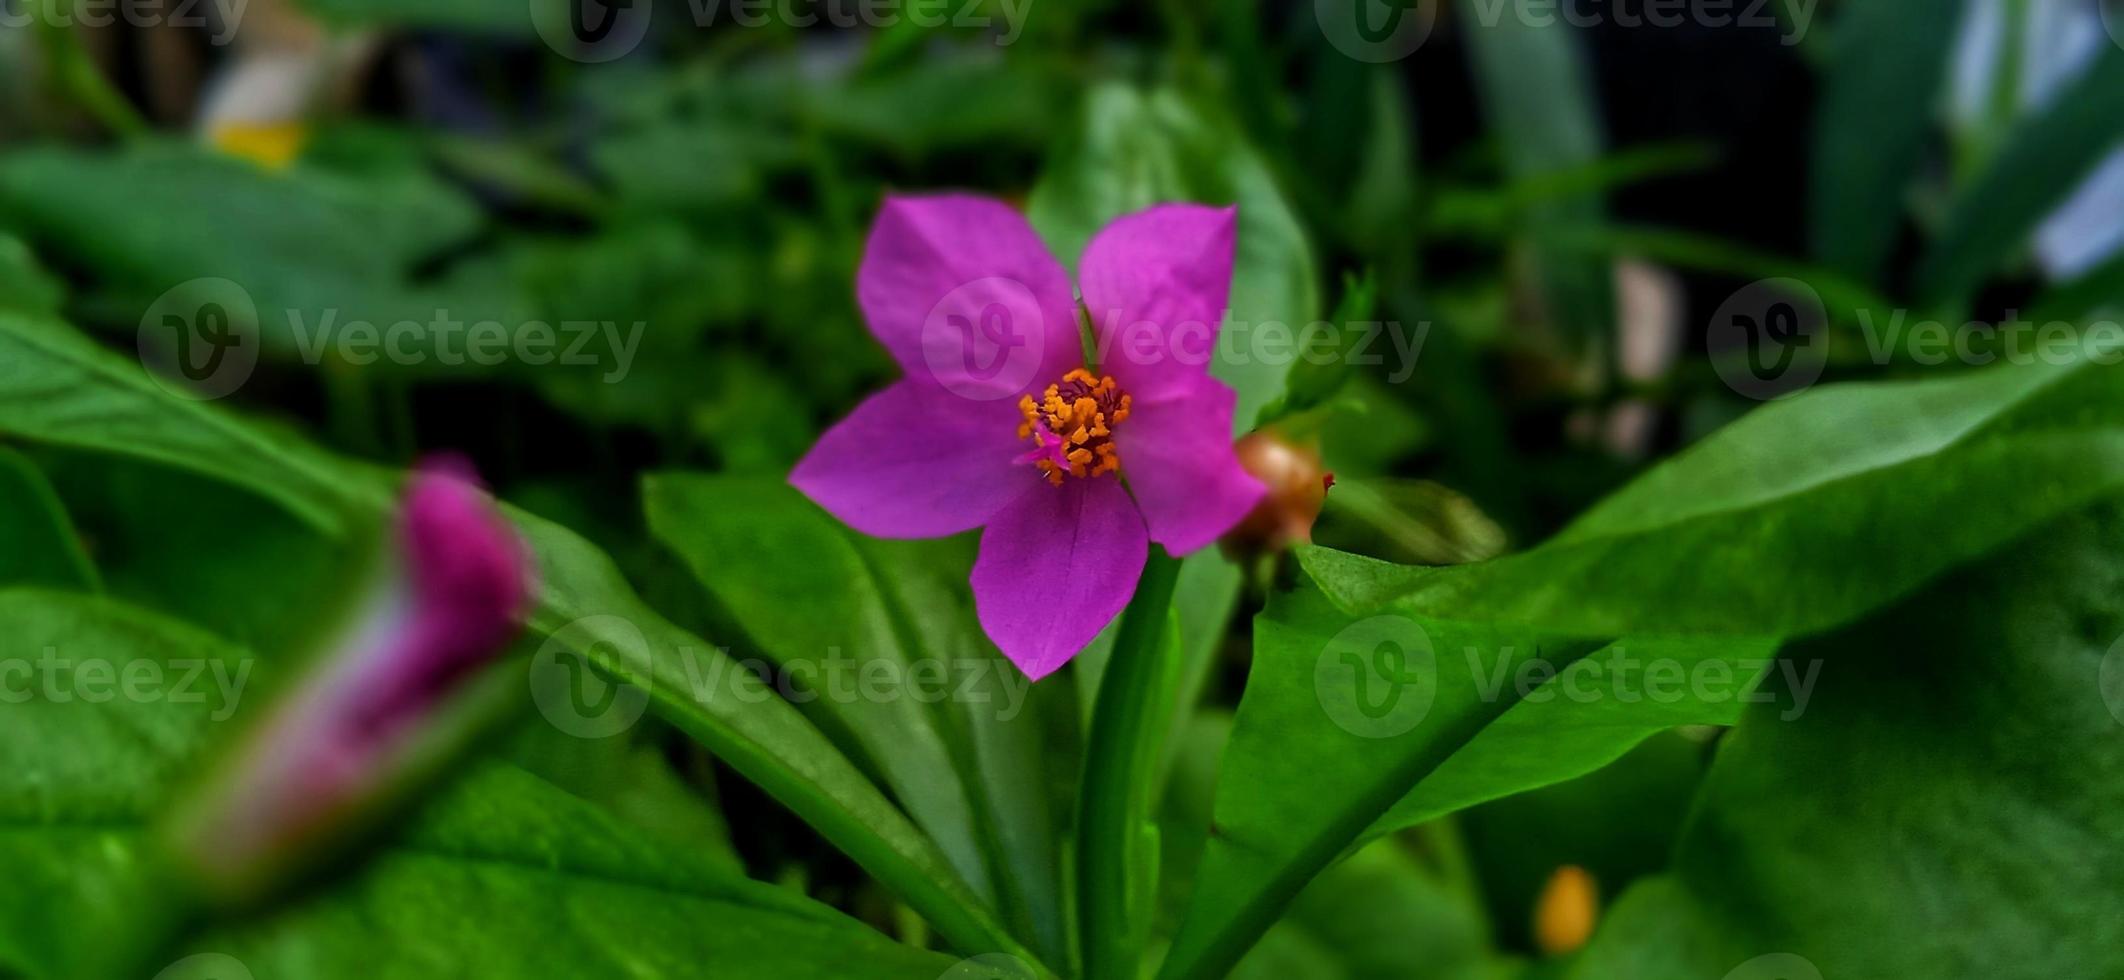 Selected focus on green leaves and beautiful pink flower of Talinum fruticosum or T. triangulare plant under the dim light condition. Suitable for magazine, promotion, backdrop, poster, science info. photo